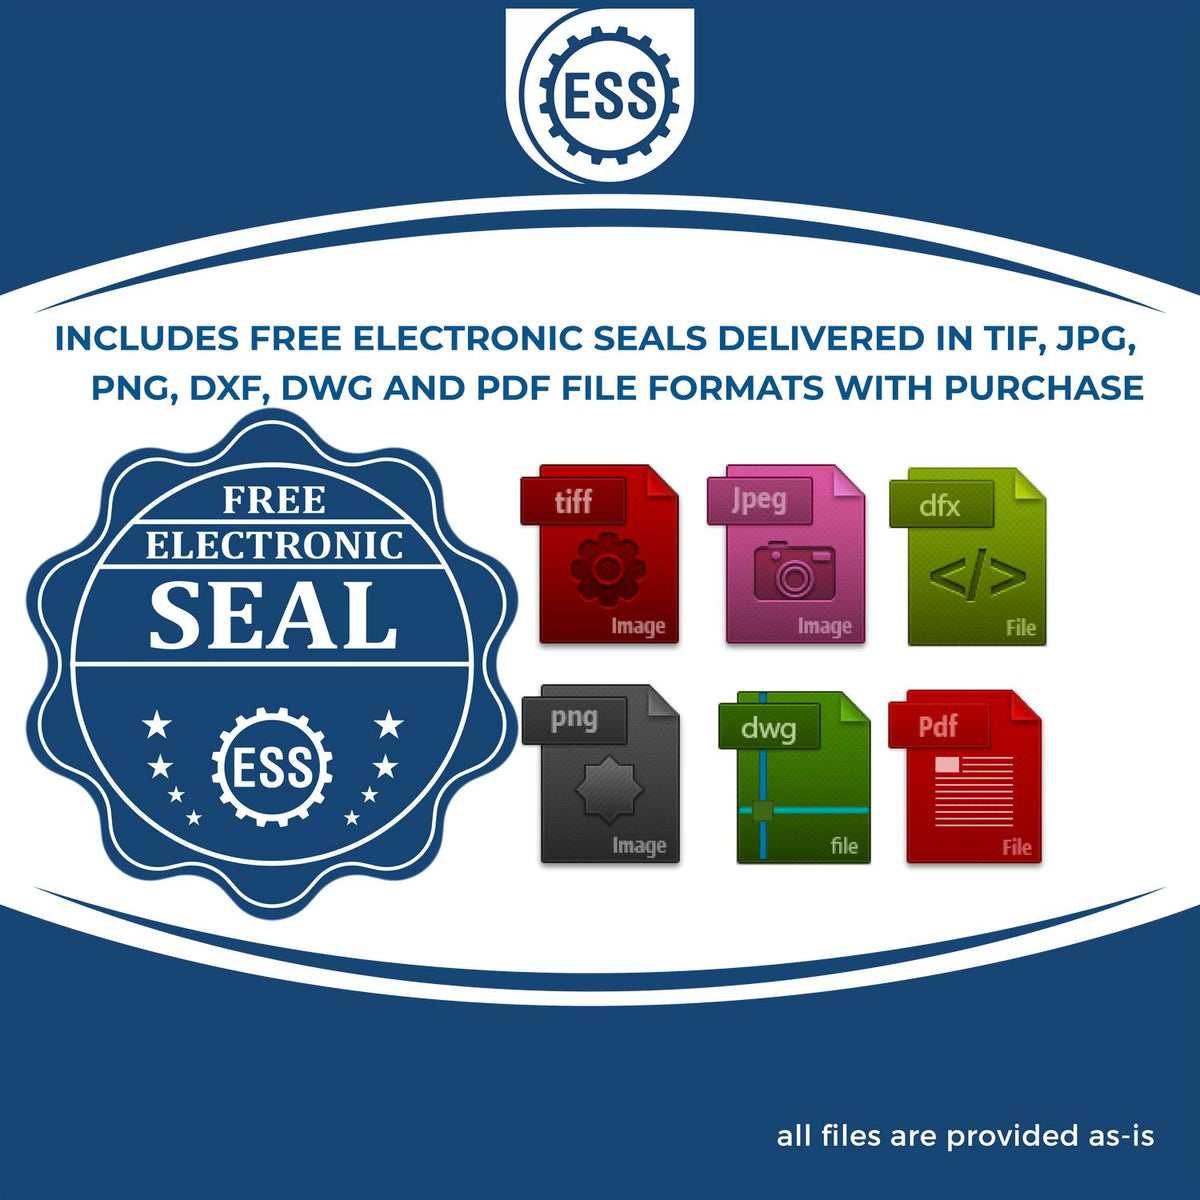 An infographic for the free electronic seal for the Gift Connecticut Landscape Architect Seal illustrating the different file type icons such as DXF, DWG, TIF, JPG and PNG.